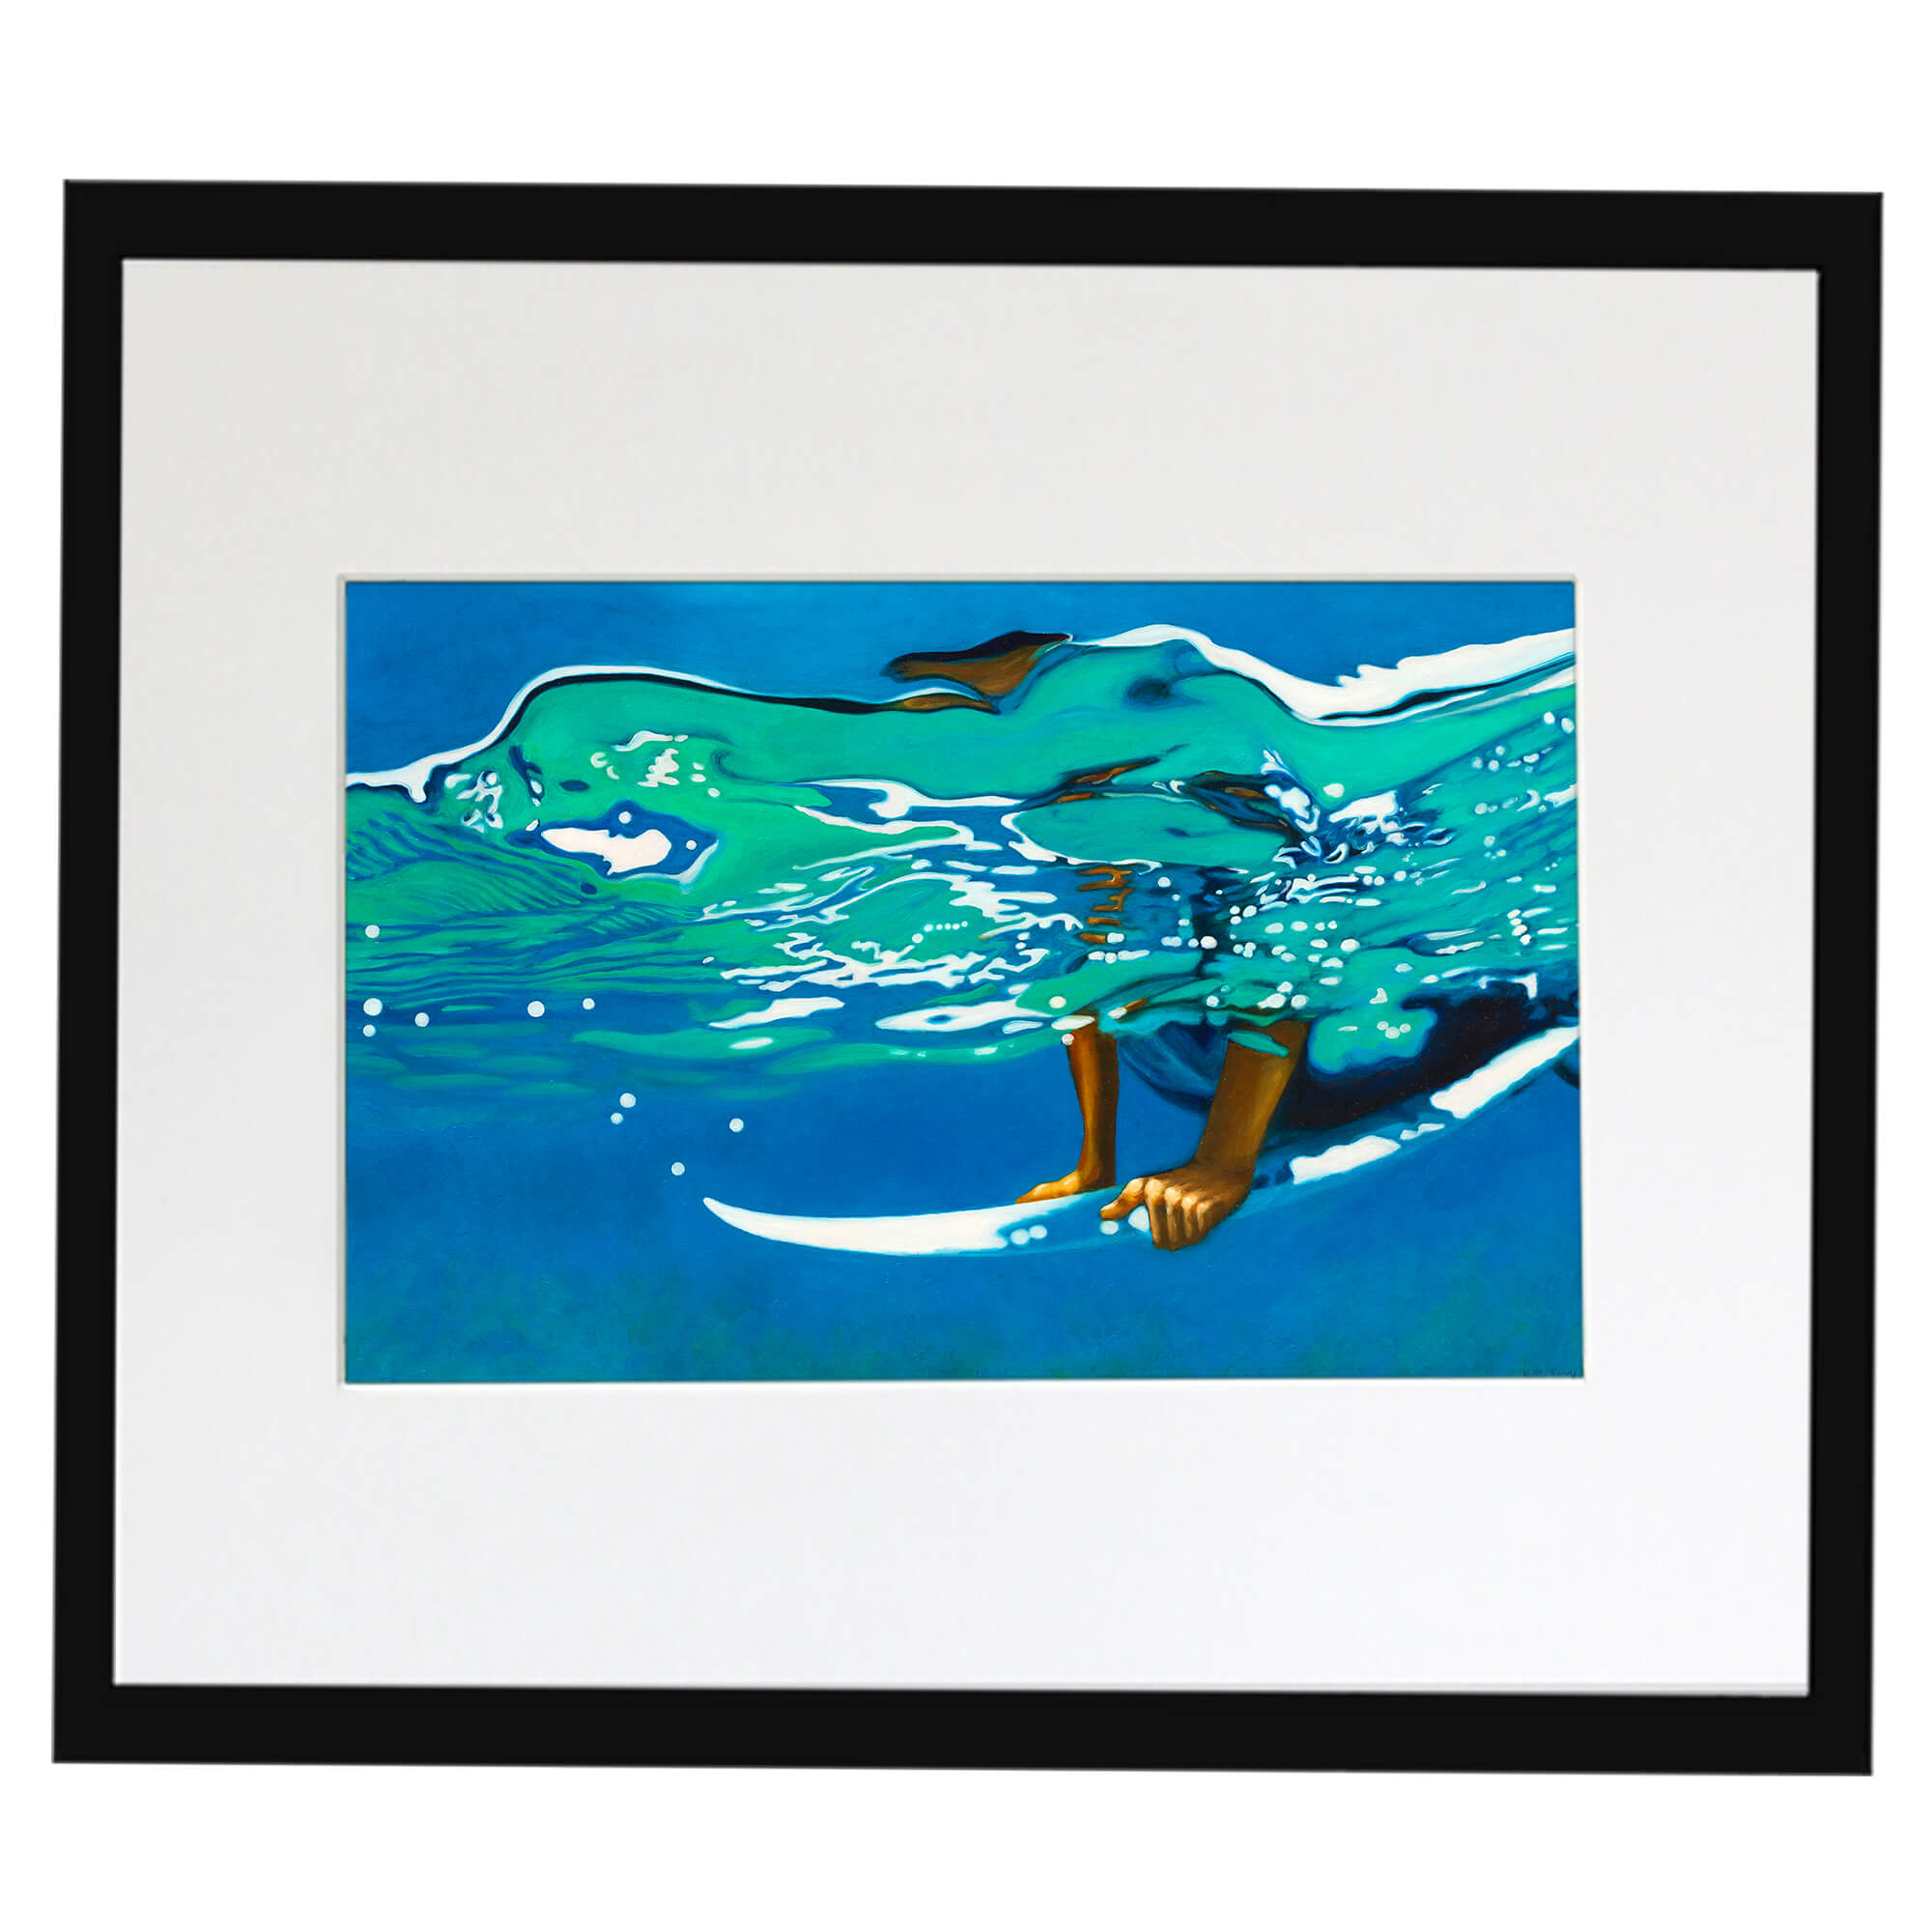 A matted art print with black frame featuring a person surfing in the blue sea  by hawaii artist Kelly Keane